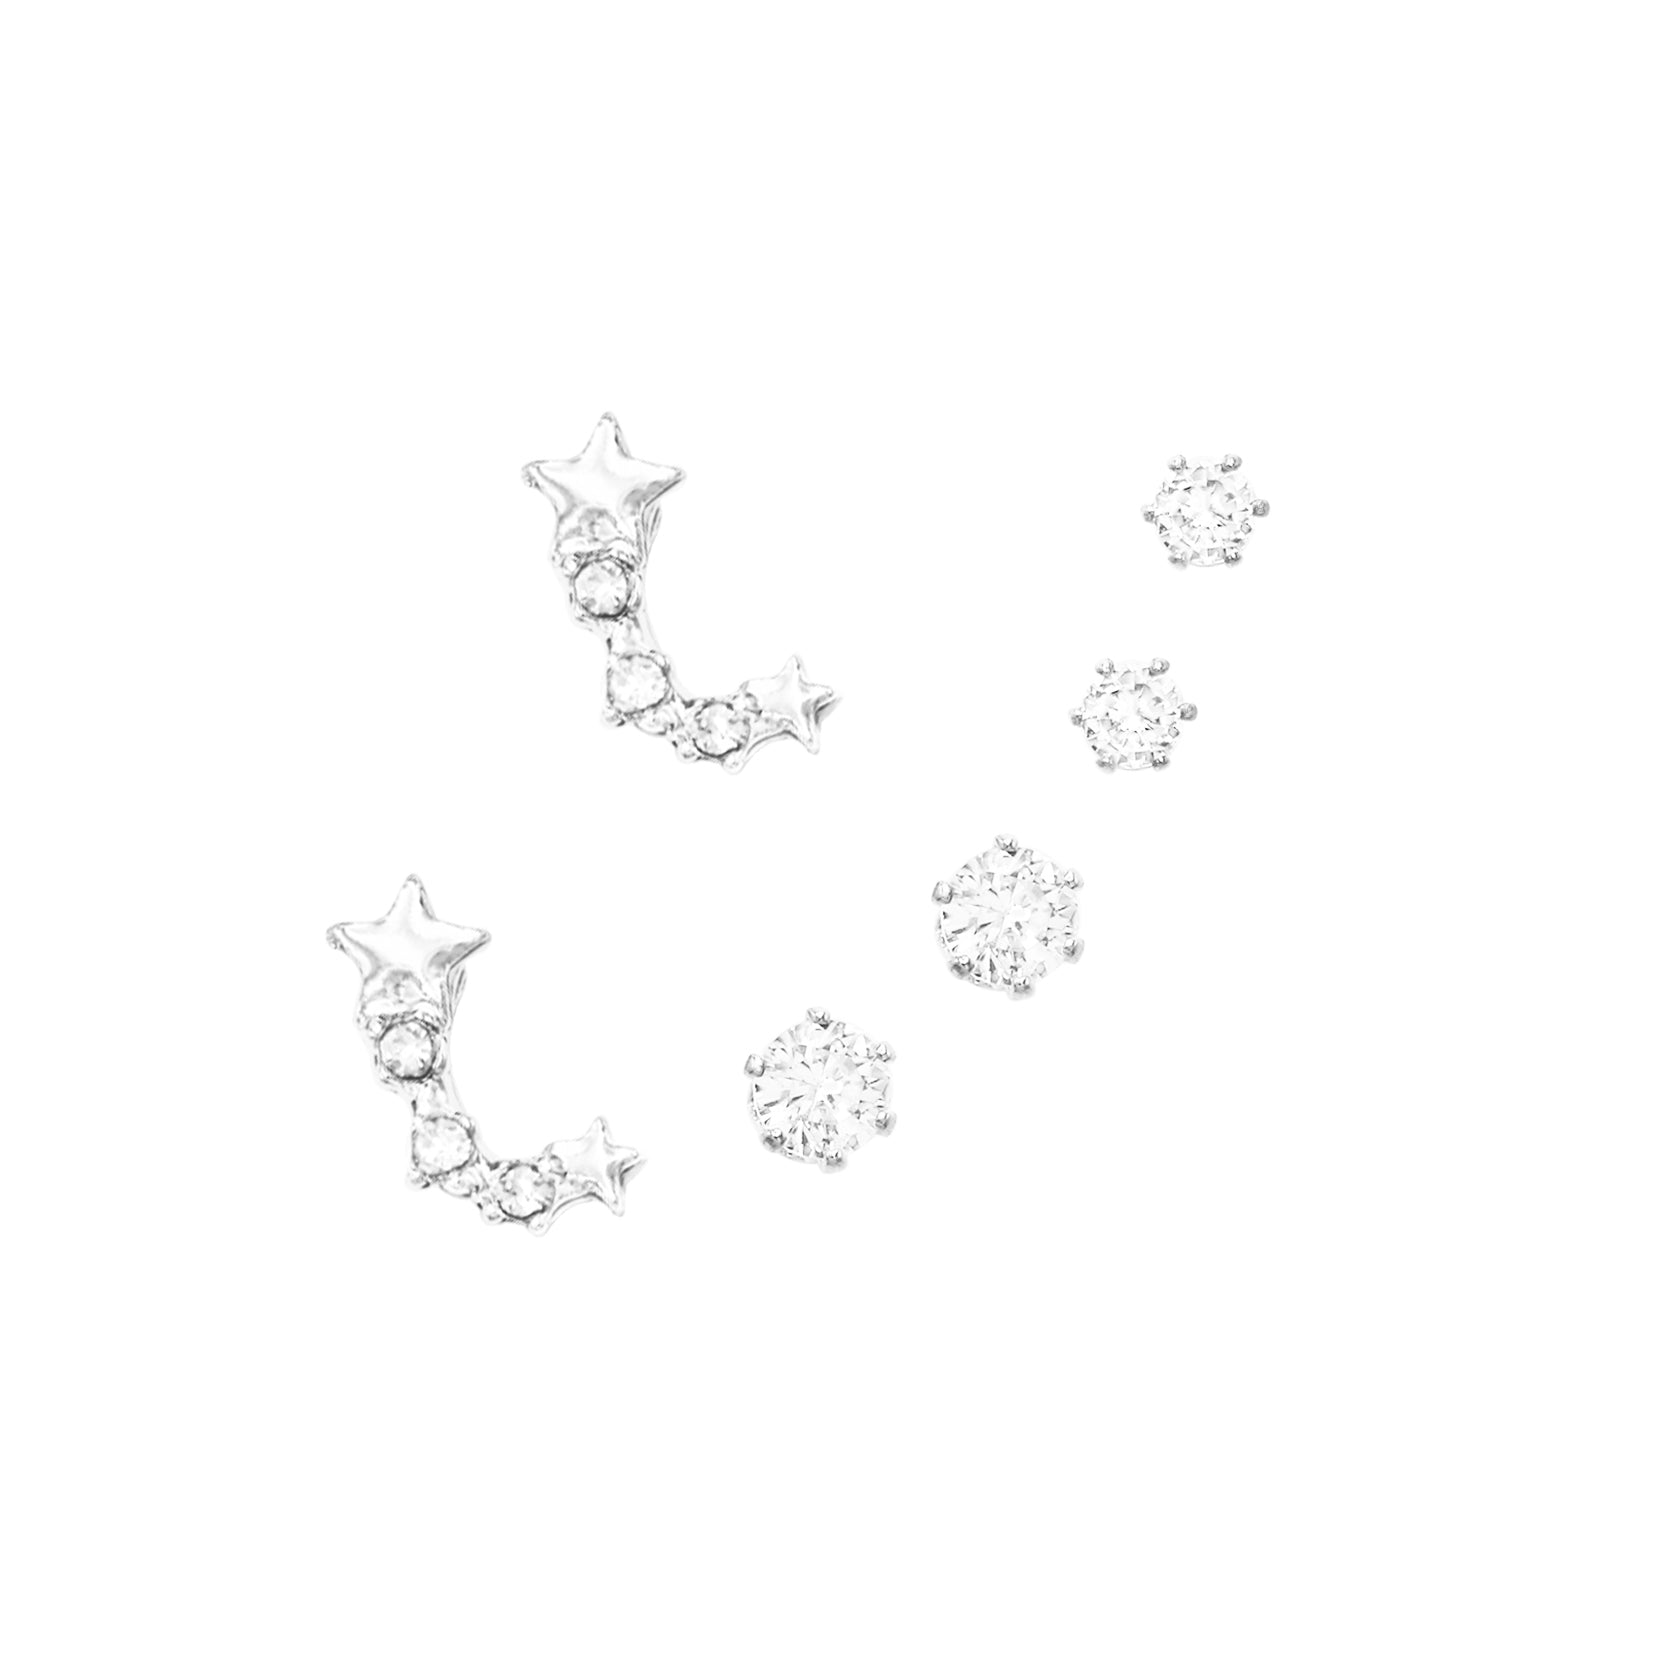 Timeless Classic Set of 3 Studs With Premium Cubic Zirconia Crystals Solitaire And Fun Shape Post Back Hypoallergenic Earrings